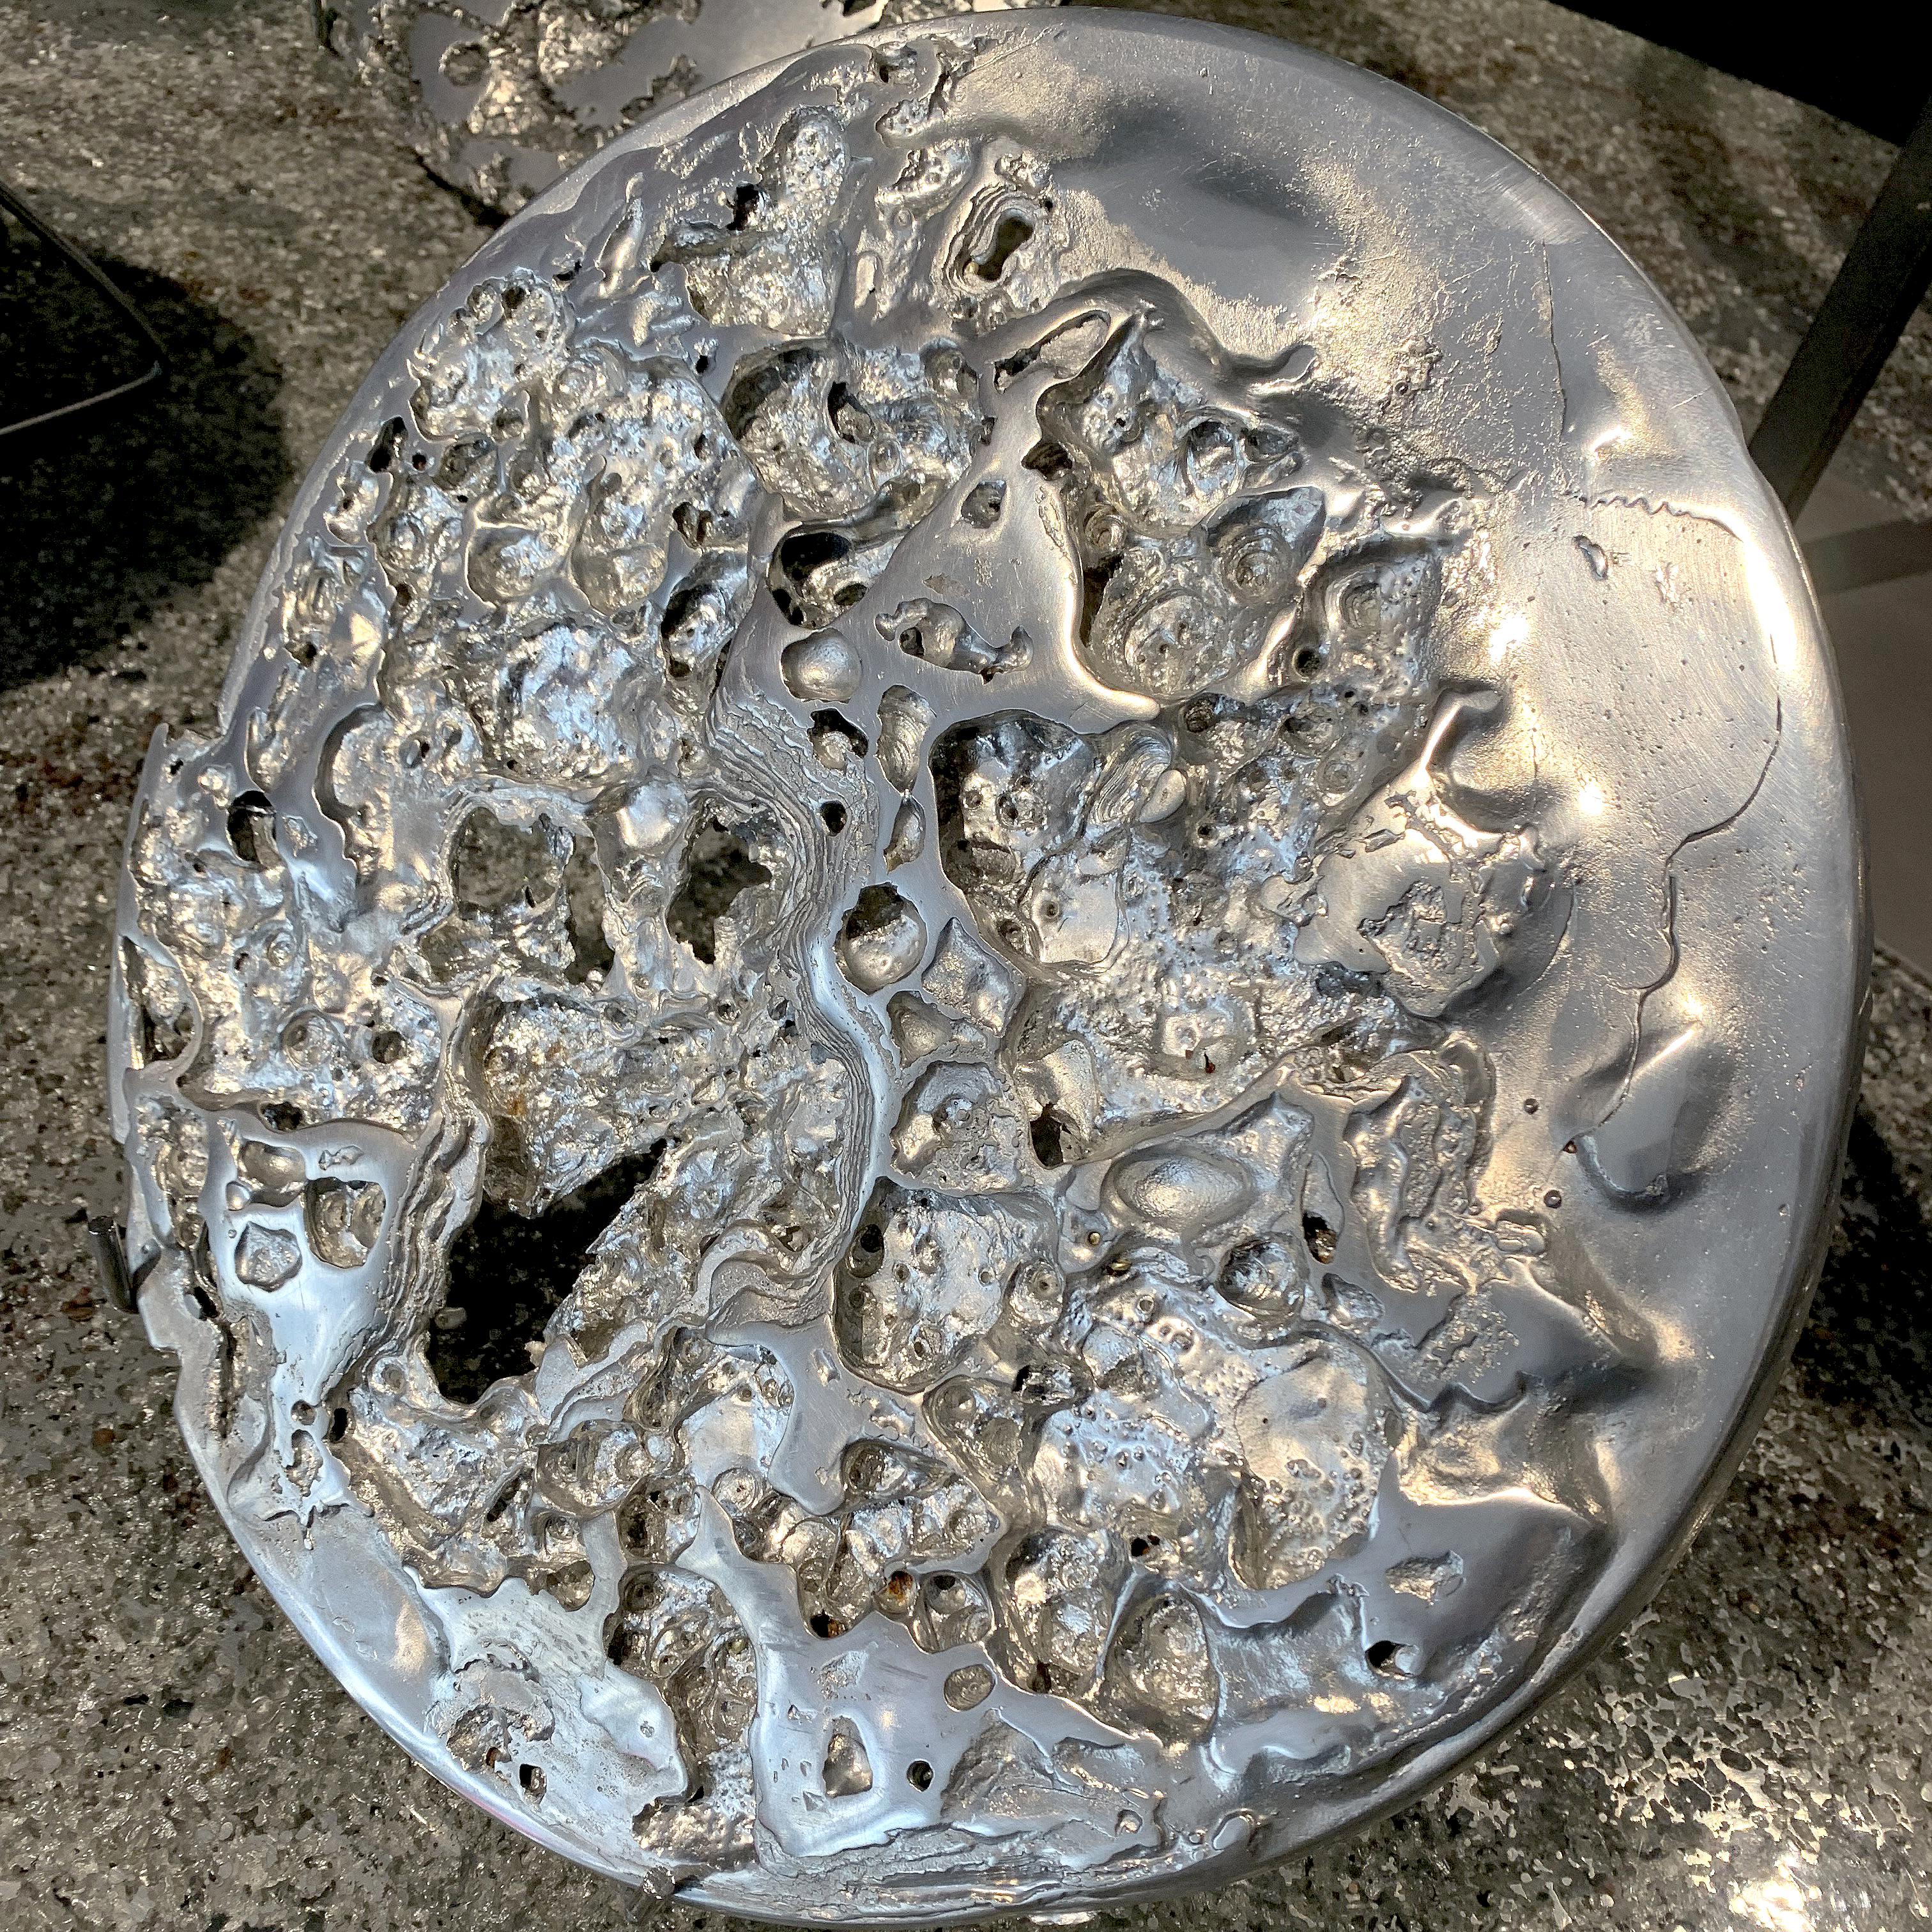 In stock: This piece of art is a pure Alchemy experimentation with pewter, made in France.
It is made of melted pewter being subjected to hot-cold thermal shock. Cooled bubbles, craters, metal lace, emerged from this secret experimentation. This is